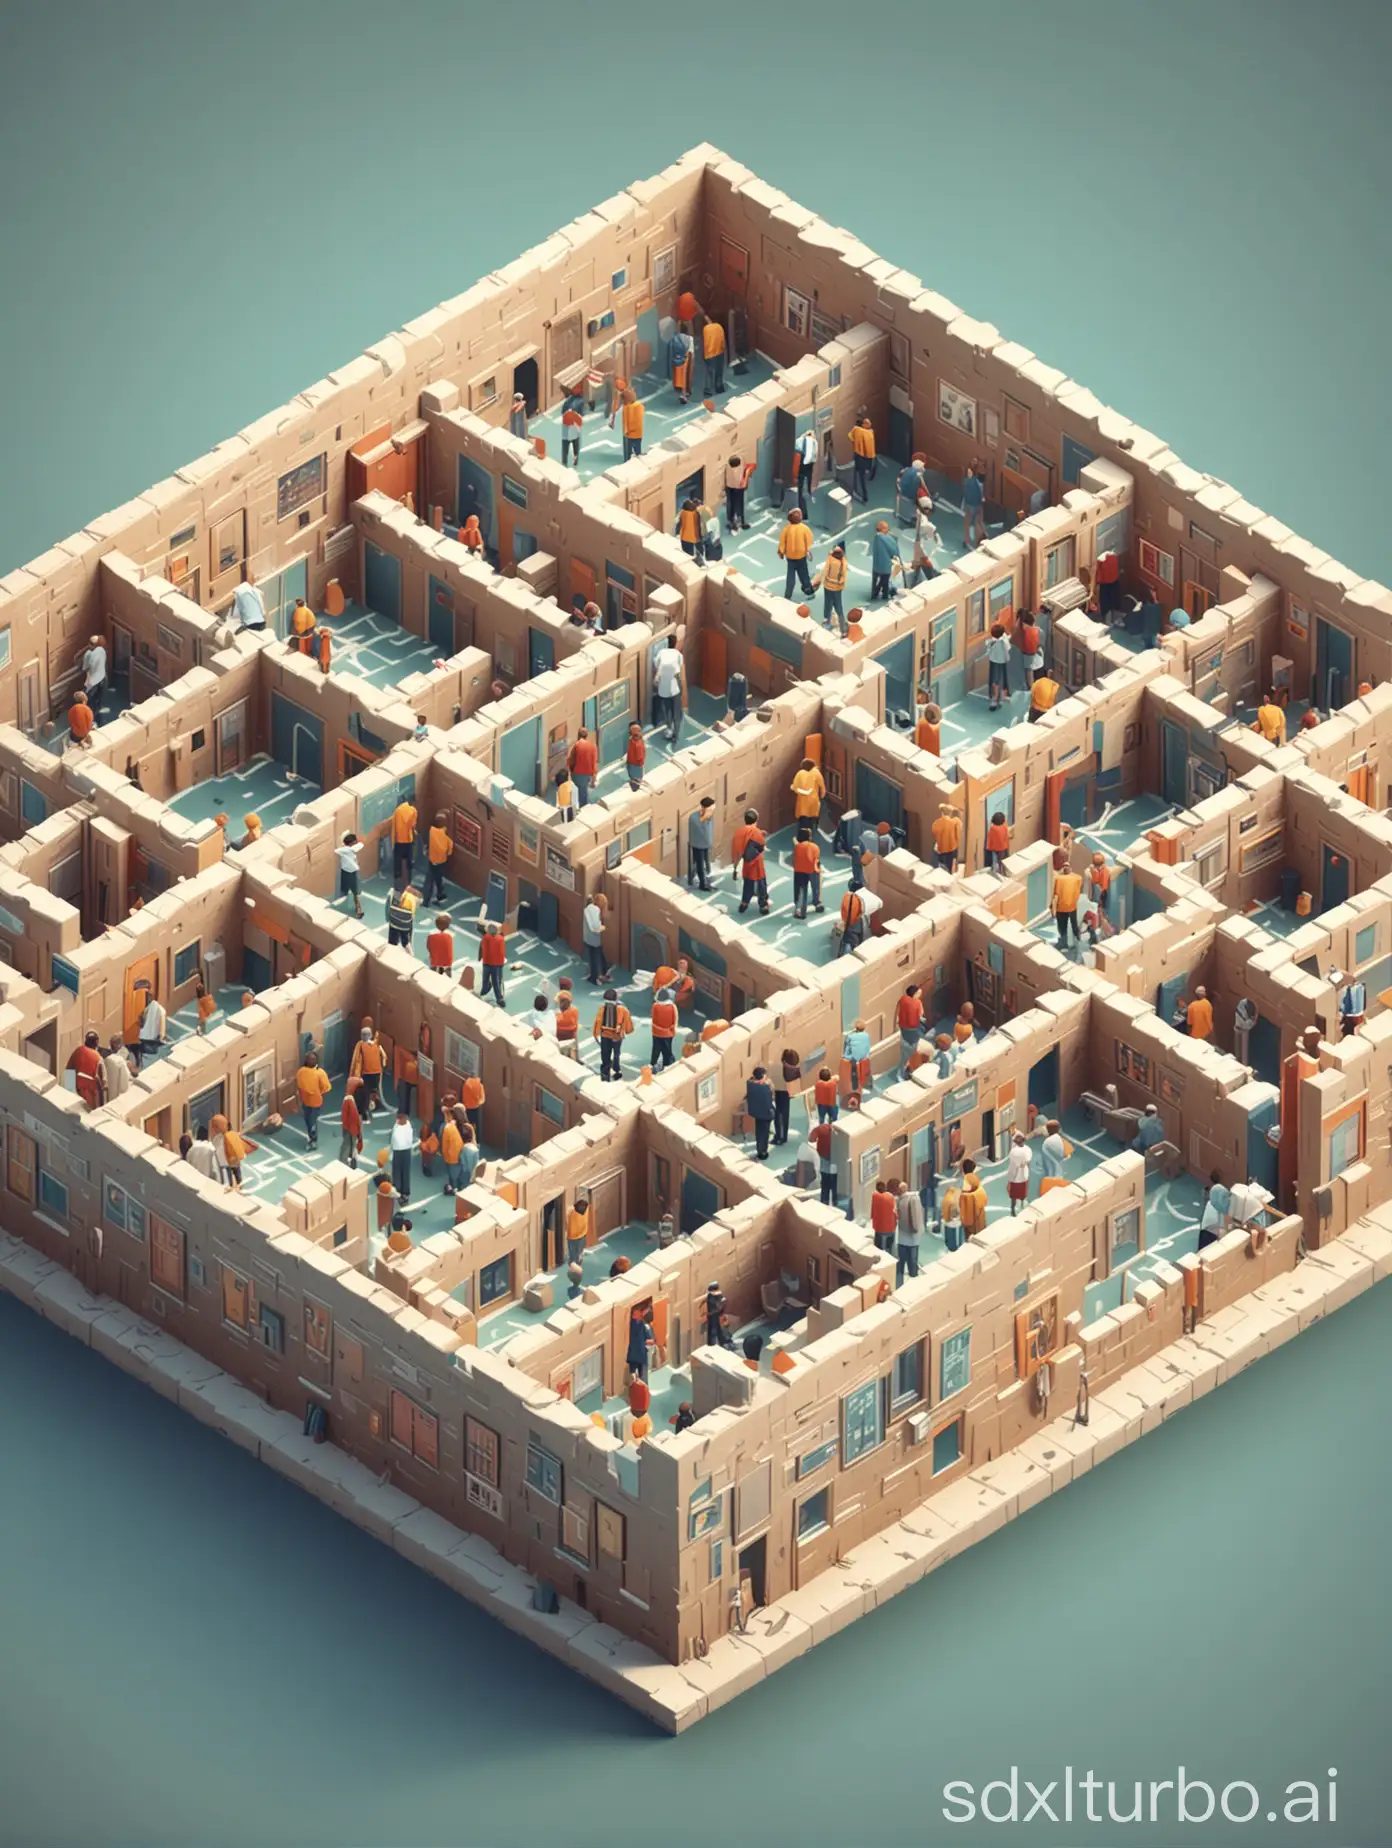 young students in an isometric maze school, low-poly style